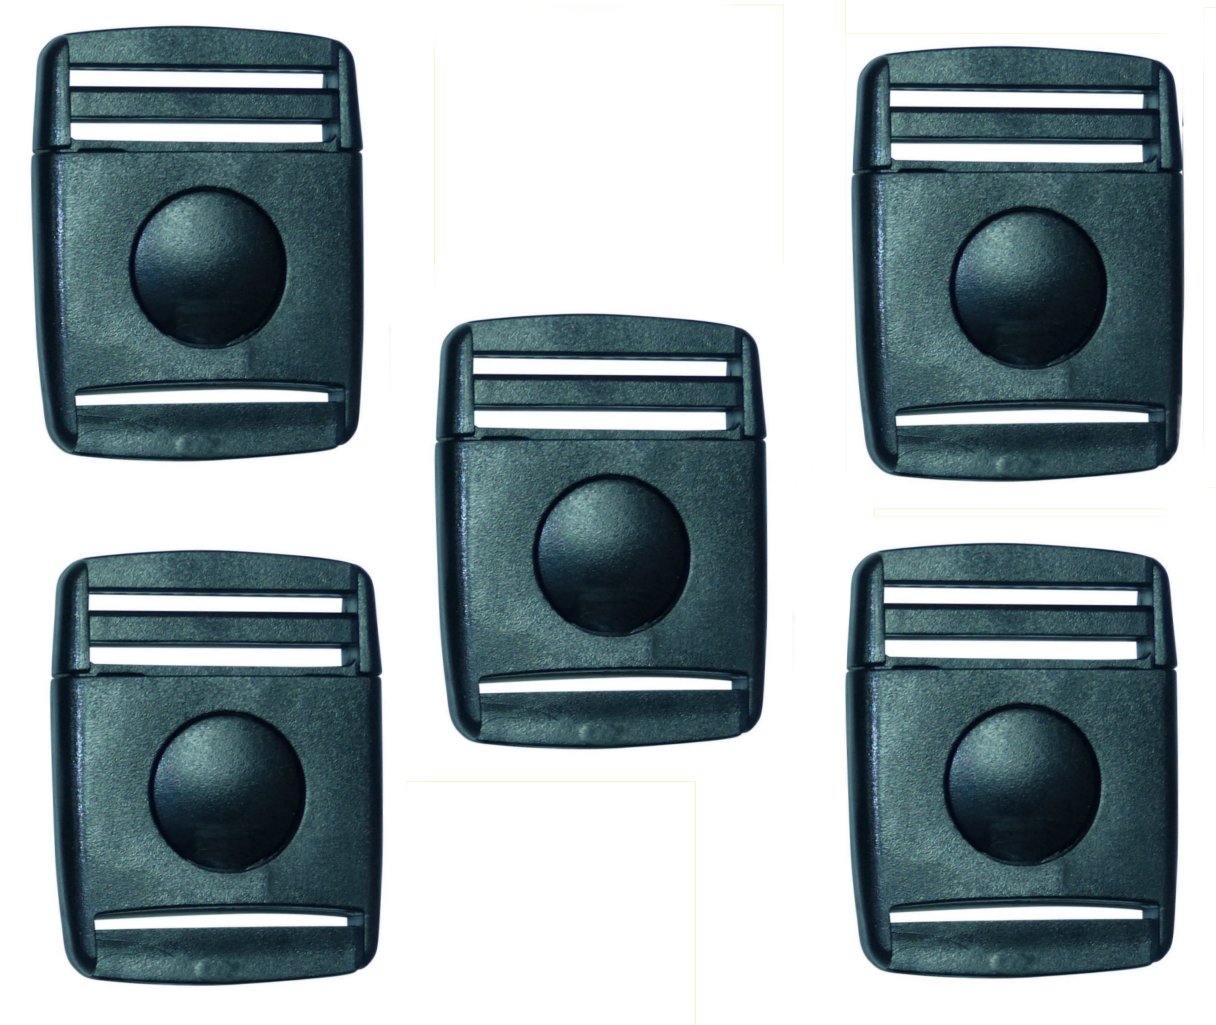 Benristraps 38mm button centre release buckle (pack of 5)